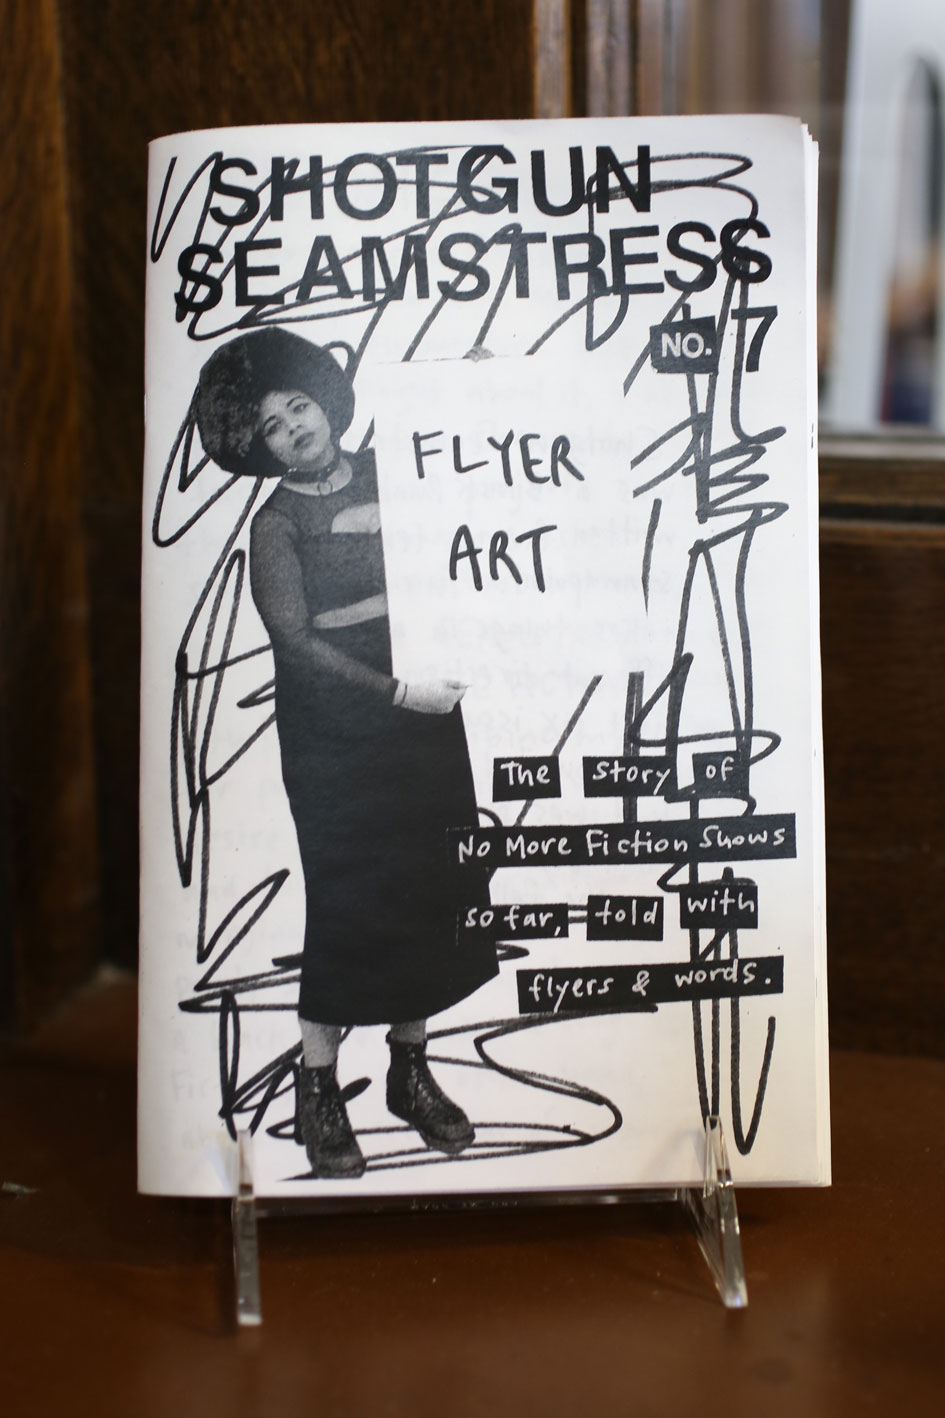 The Shotgun Seamstress by Osa Atoe (A Zine by and for Black Punks!)